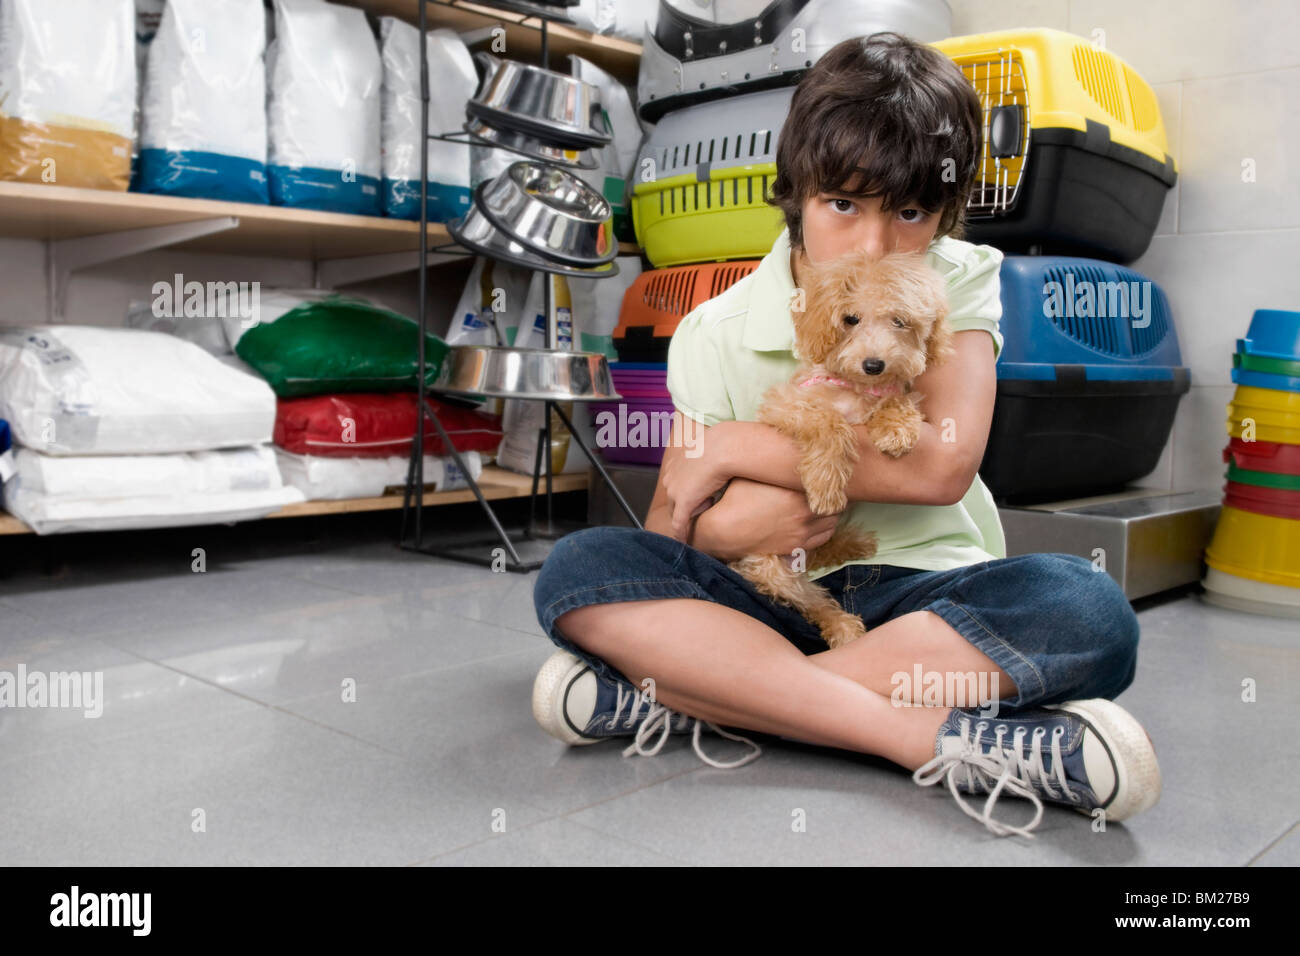 Boy carrying a puppy in a supermarket Stock Photo